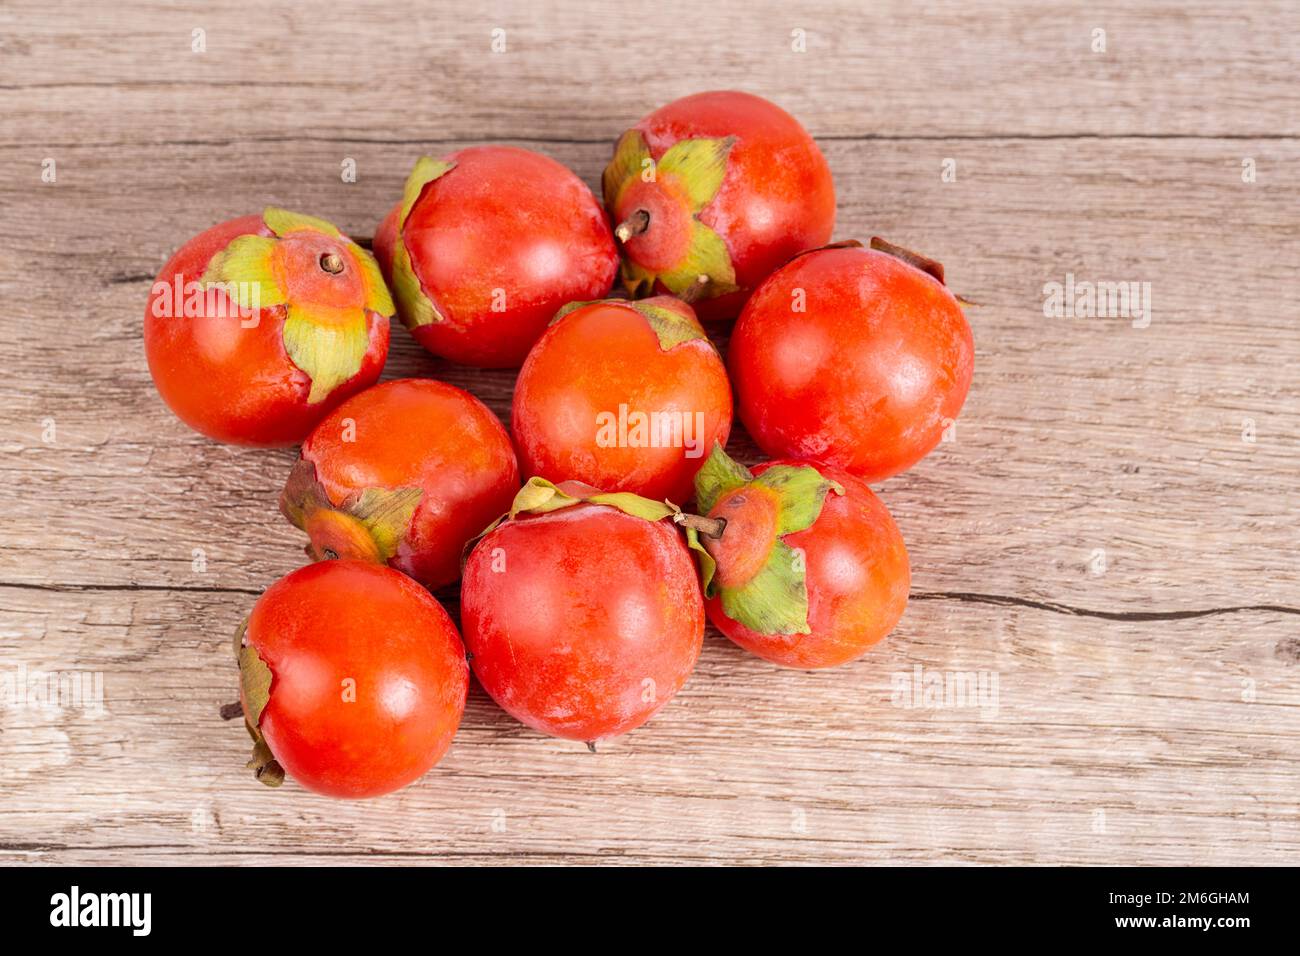 Persimmons on wooden table background Stock Photo